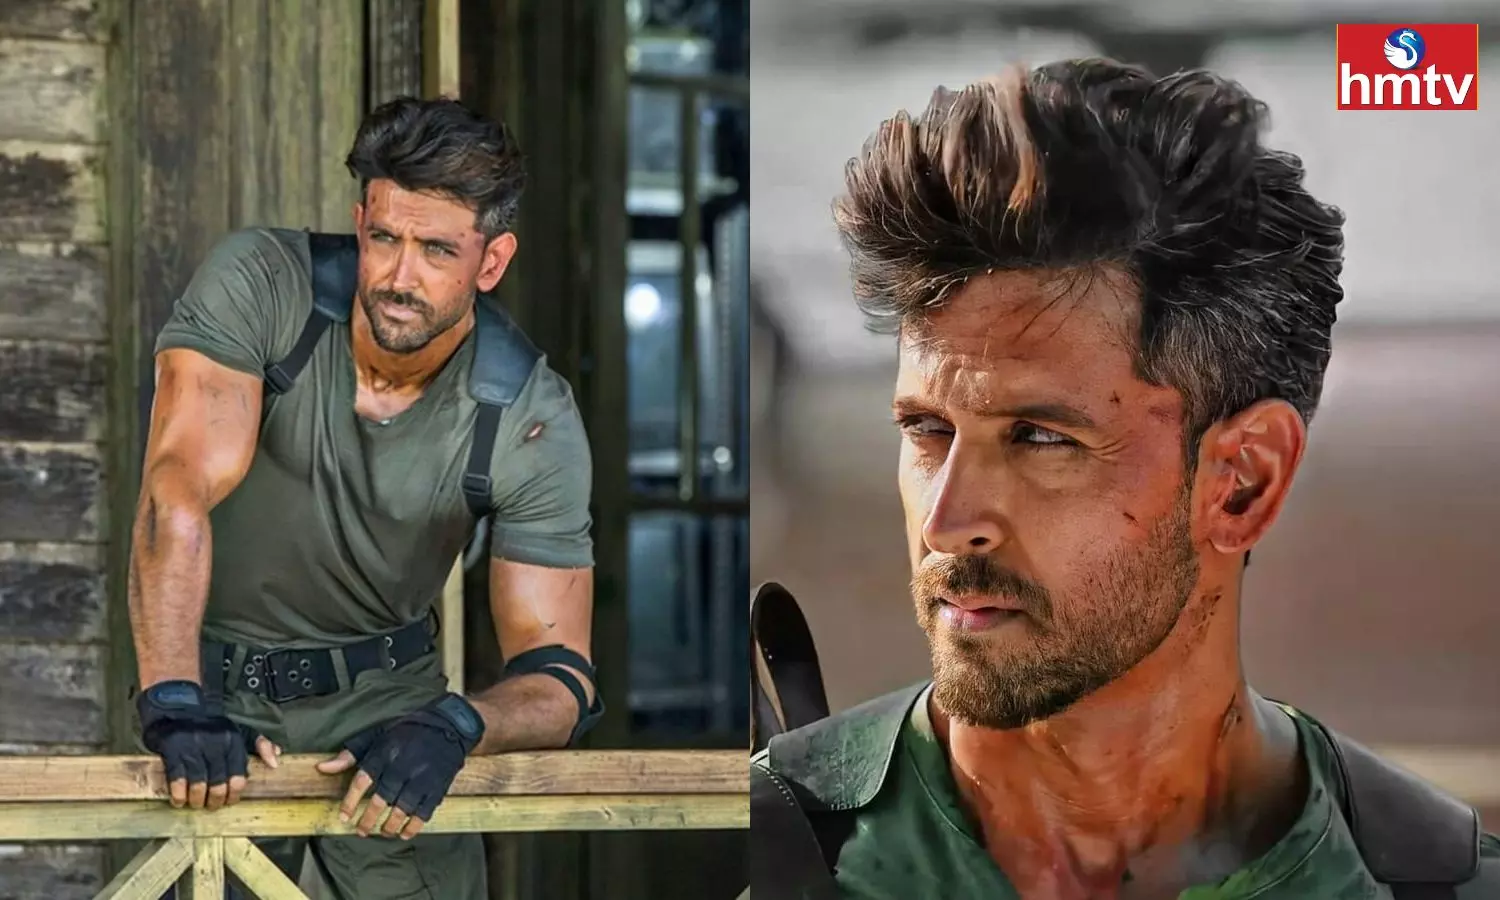 Hrithik Roshan is Going to Start War 2 With a Mind Blowing Action Scene